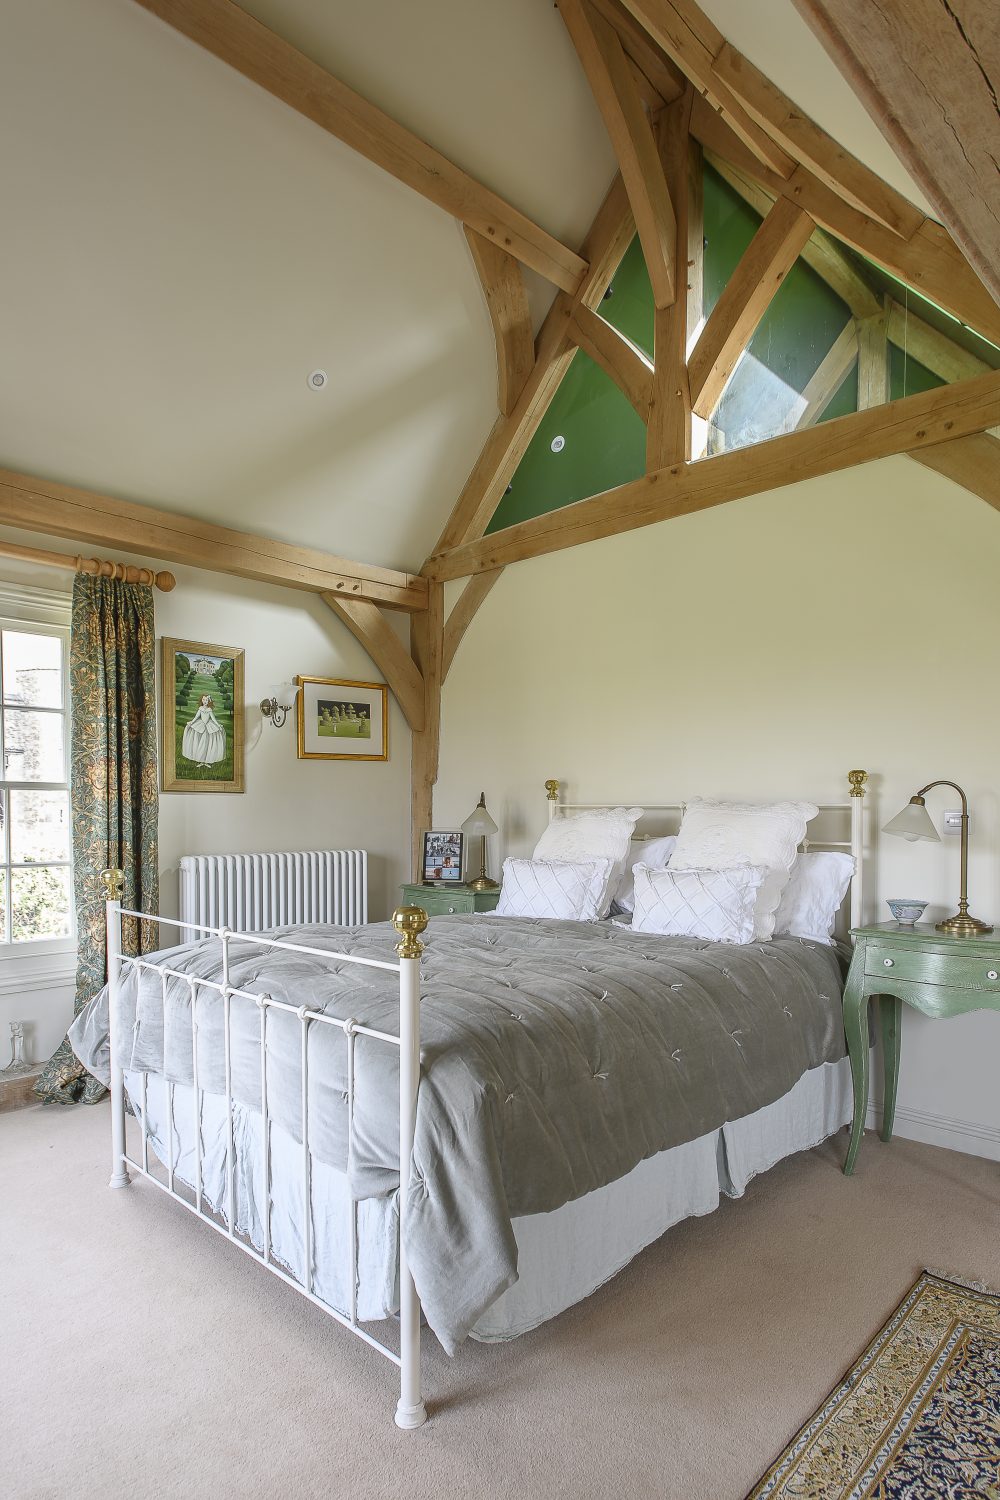 The master bedroom is situated in the two storey extension that Tim and Eve added to the house. The oak frame was made by Paul Cresswell from Sackville Oak Frames, taking around nine weeks to construct in his Kentish workshop, but just three days to install on site